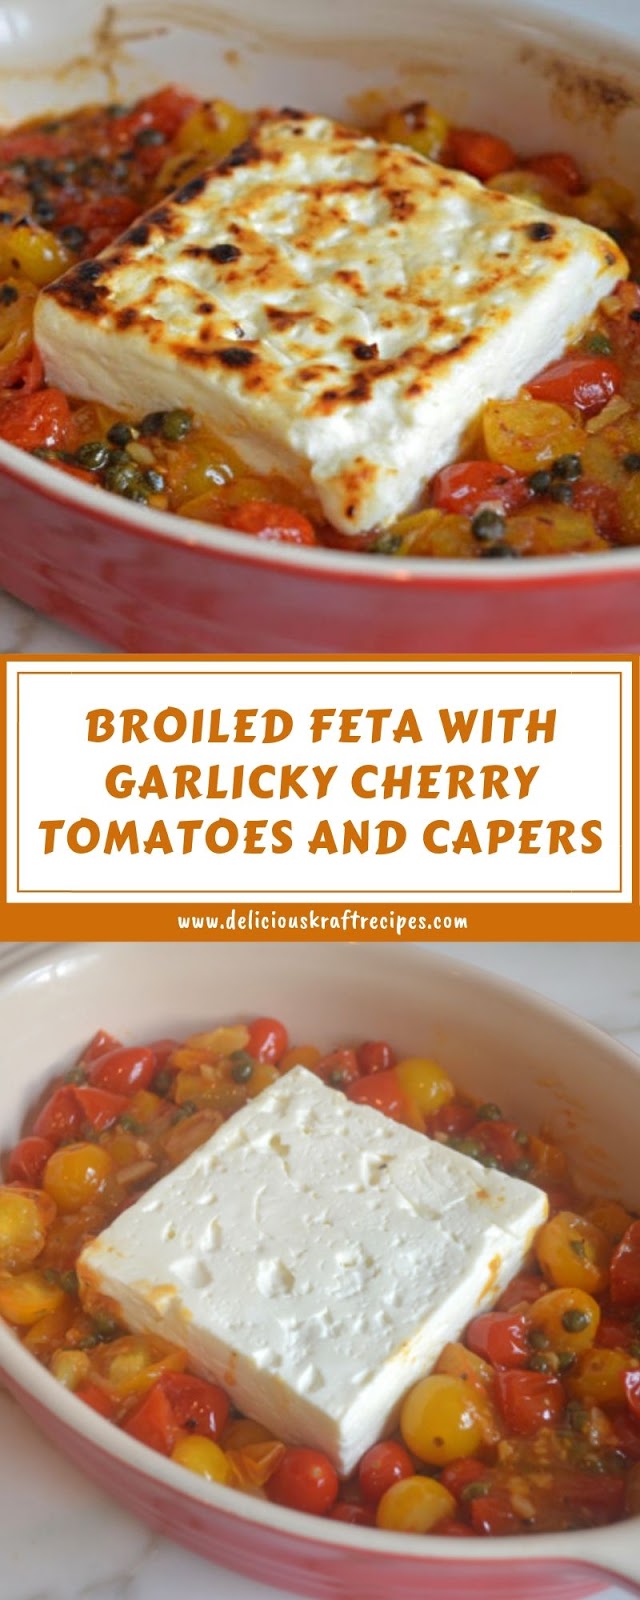 BROILED FETA WITH GARLICKY CHERRY TOMATOES AND CAPERS